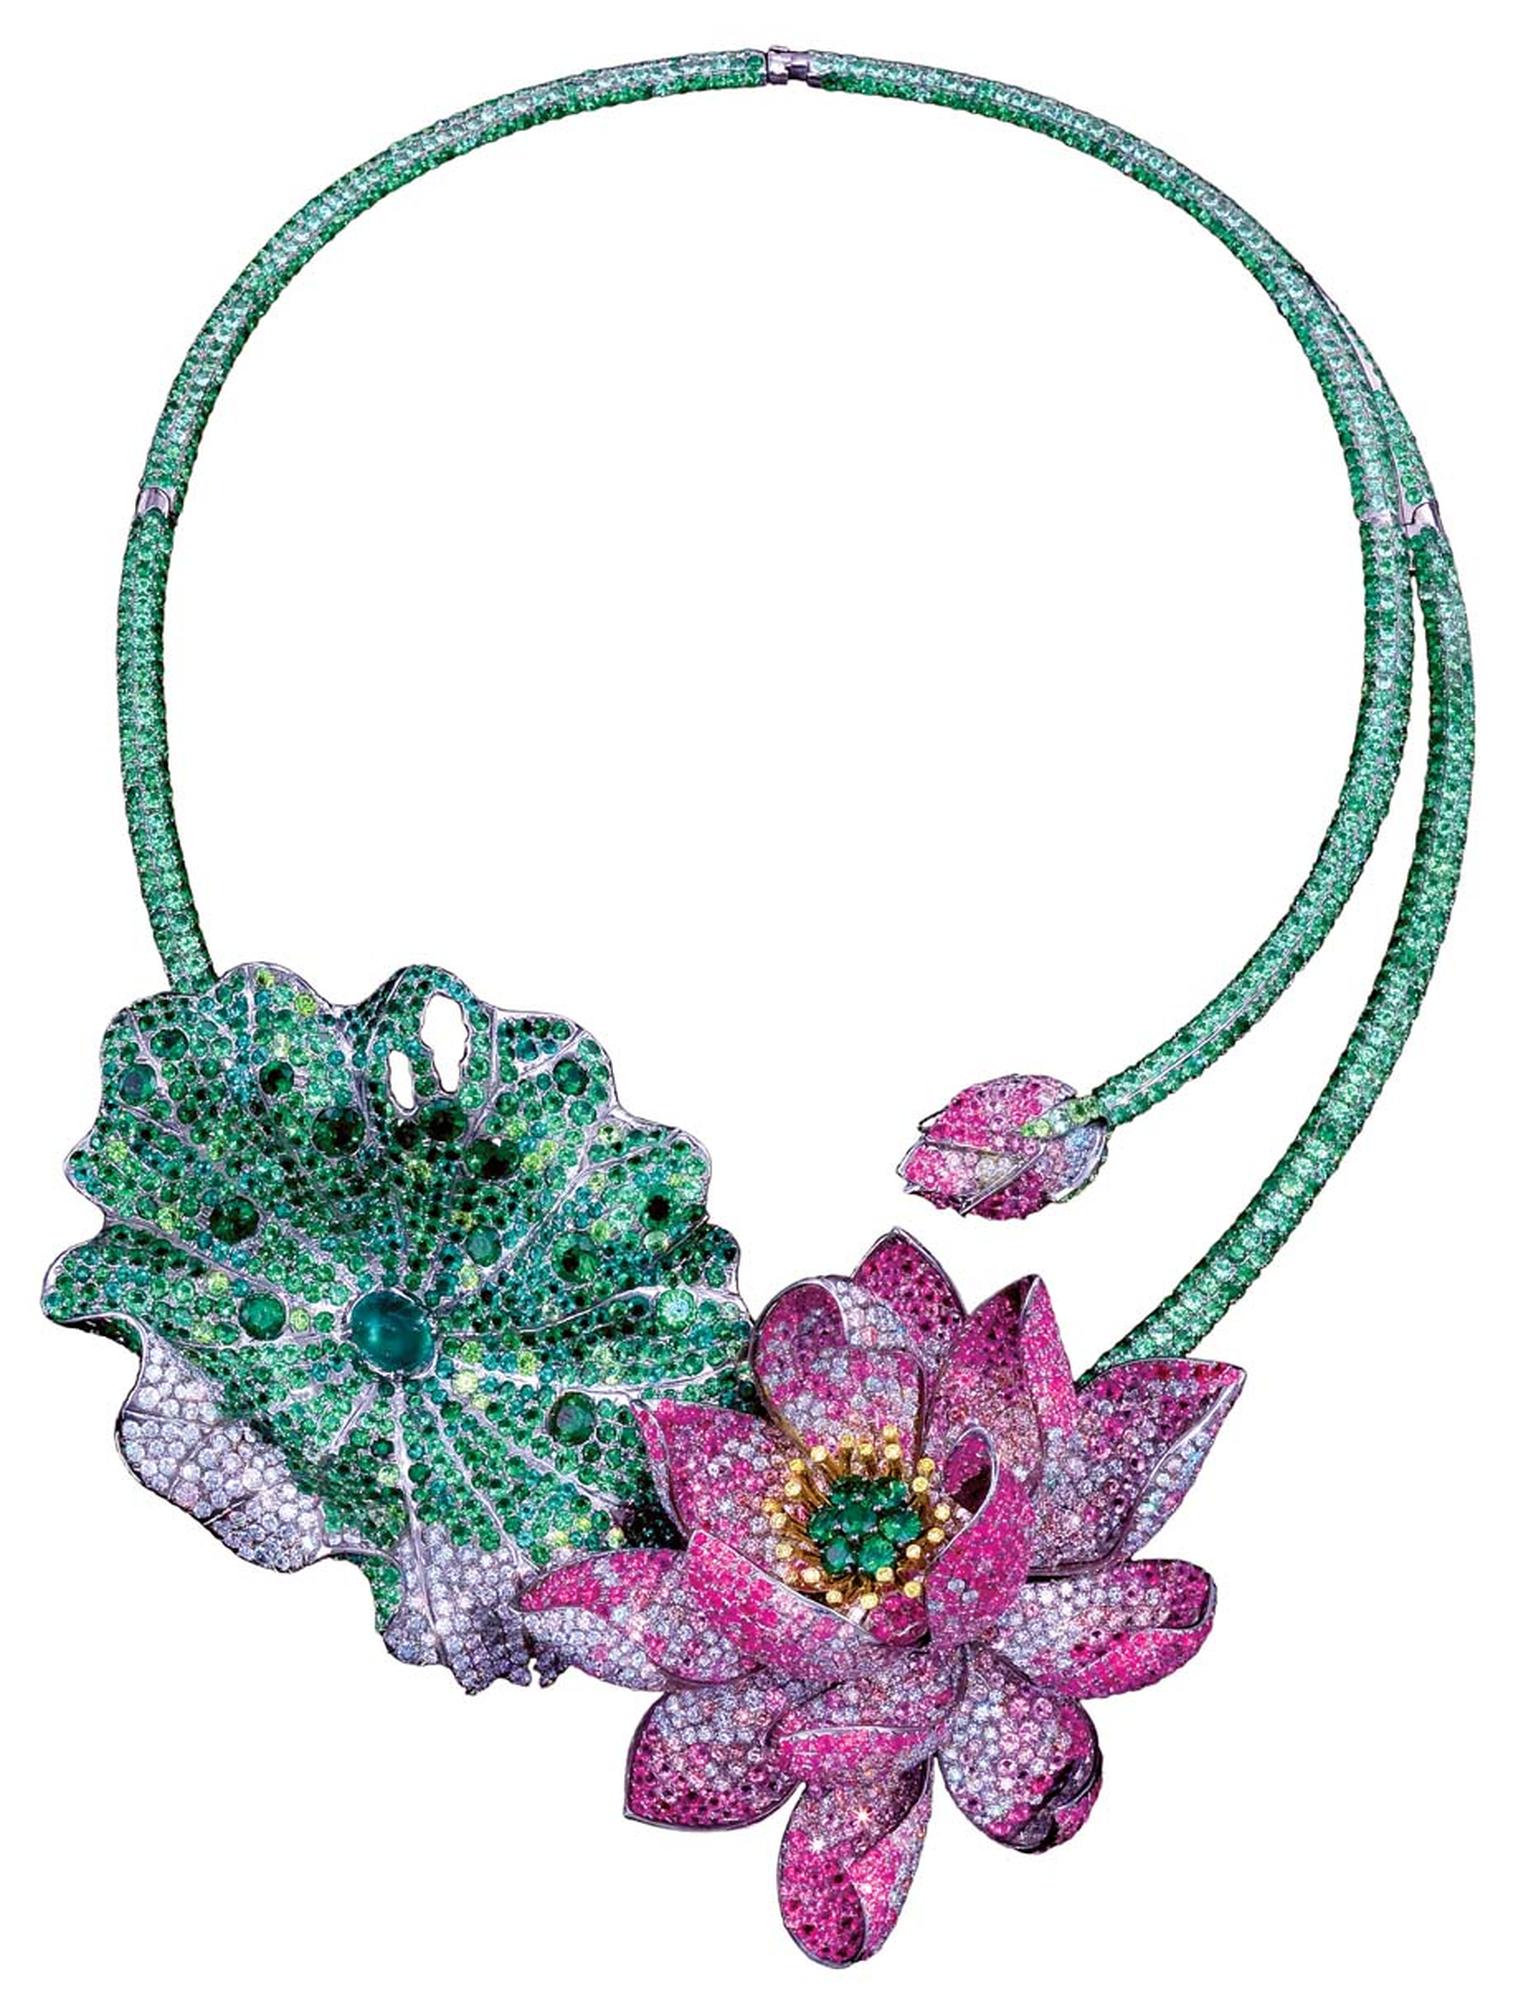 Anna Hu Art Nouveau-style Celestial Lotus necklace set with natural Fancy Intense vivid yellow, grey and white diamonds, natural Burmese rubies, Colombian emeralds, demantoid garnets, tsavorites, and multi-coloured pink sapphires in titanium.